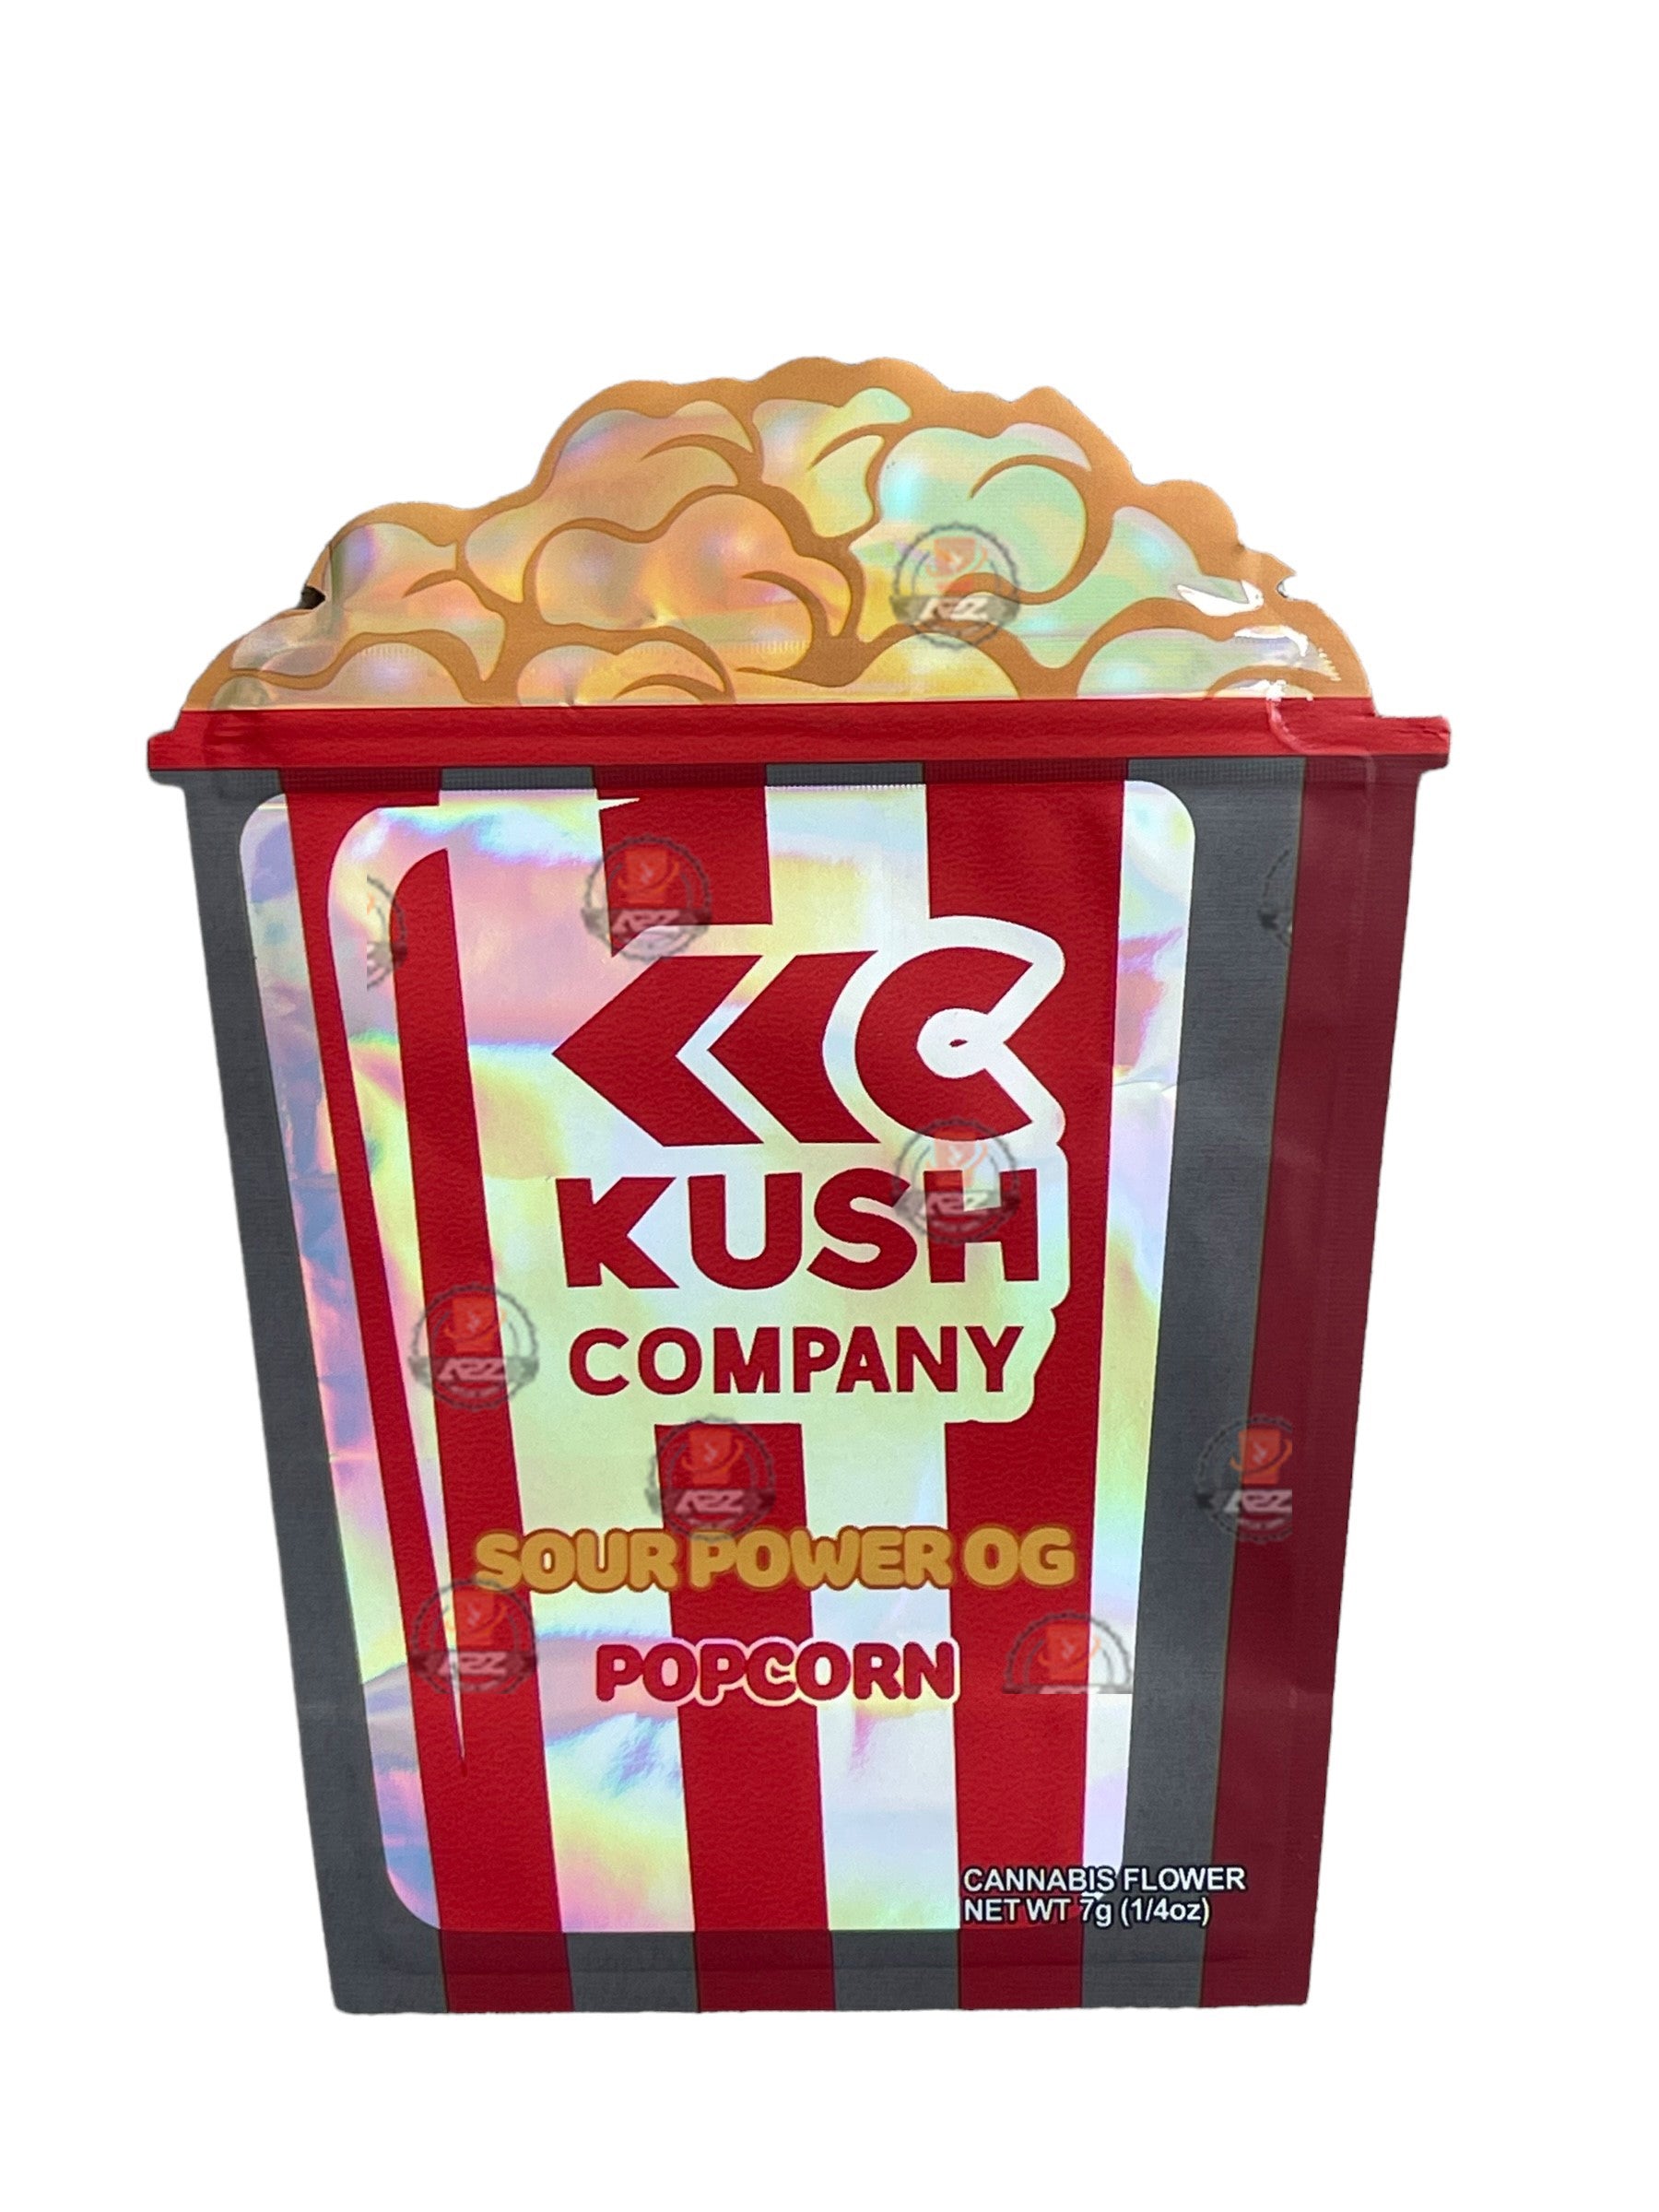 Kush Company Popcorn Sour power OG  3.5G Mylar Bags Holographic cut out